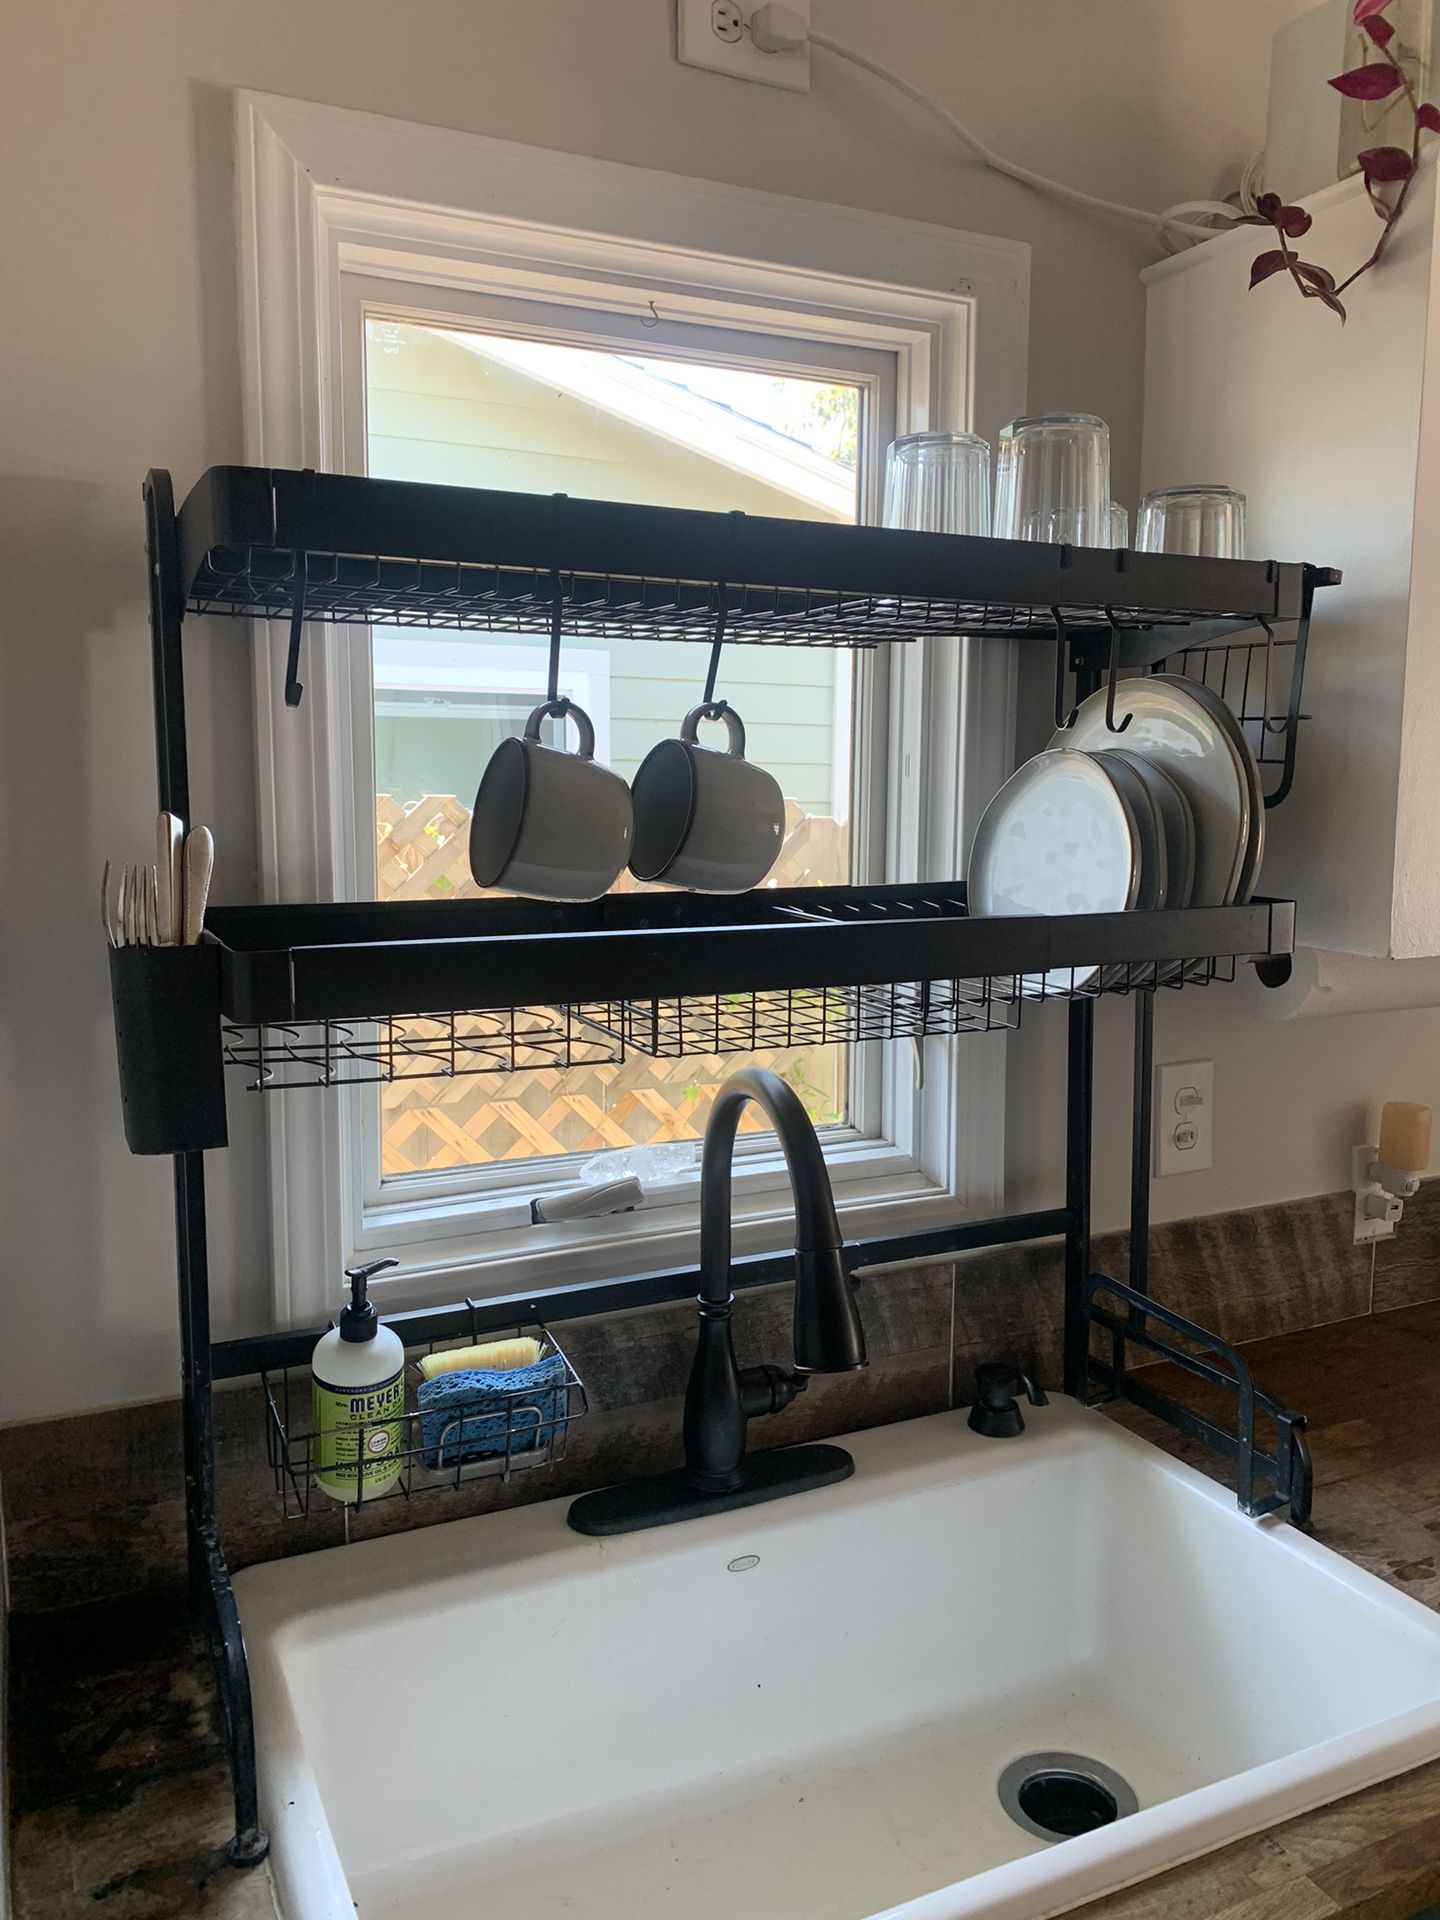 Japanese Over Sink Storage & Drying Rack